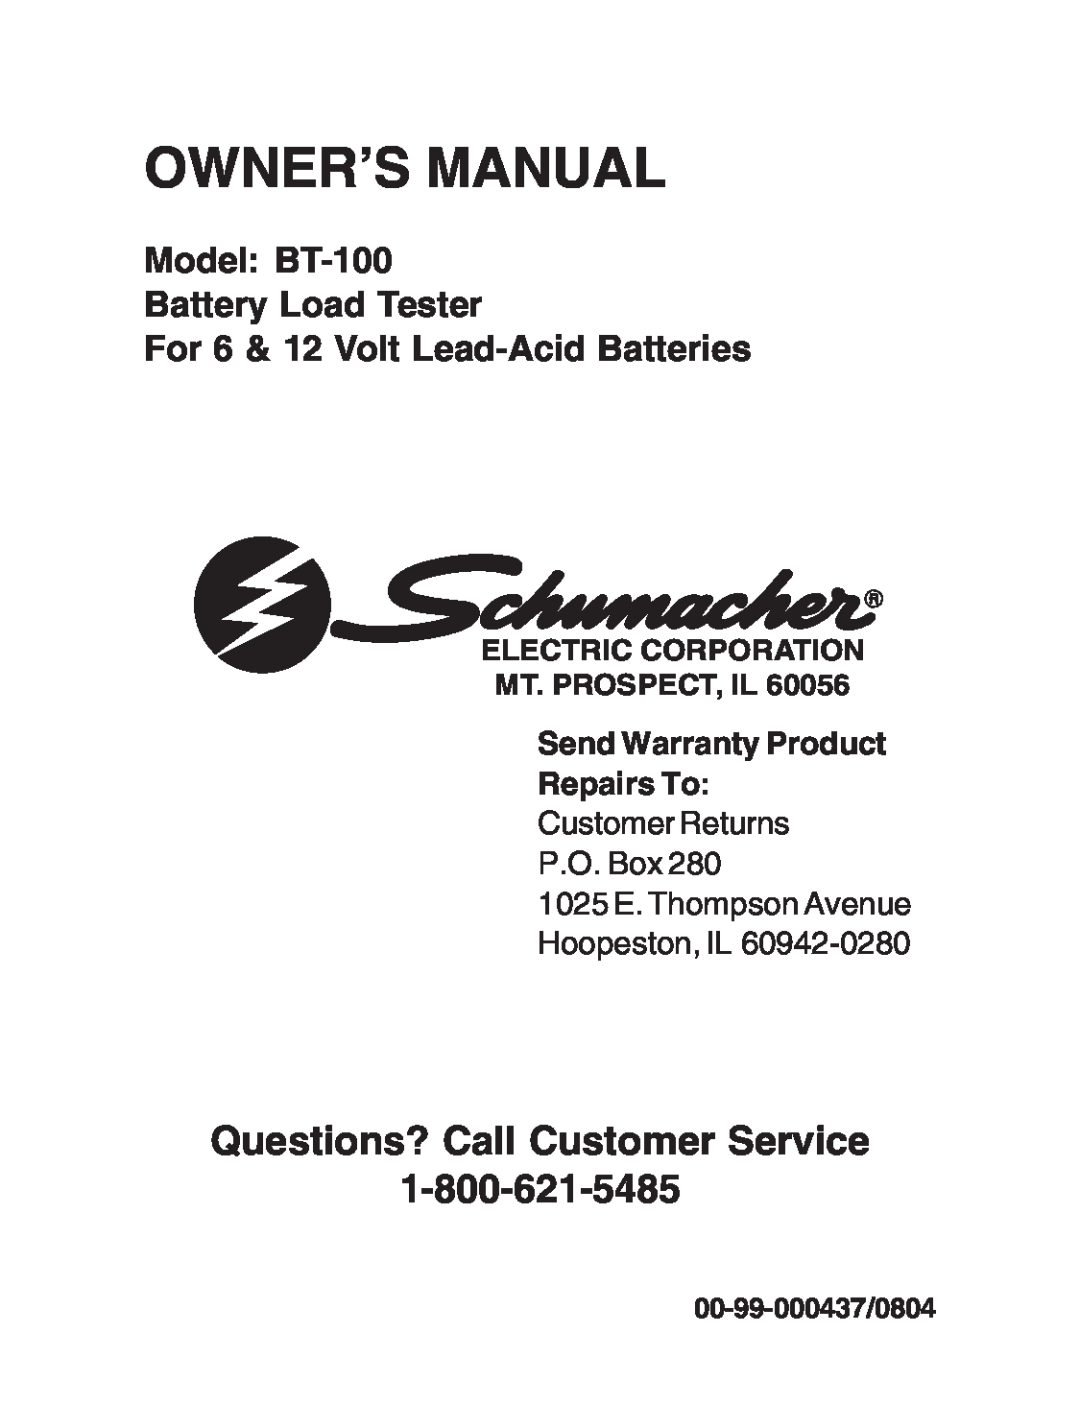 Schumacher BT-100 owner manual Send Warranty Product Repairs To, Owner’S Manual, Questions? Call Customer Service 